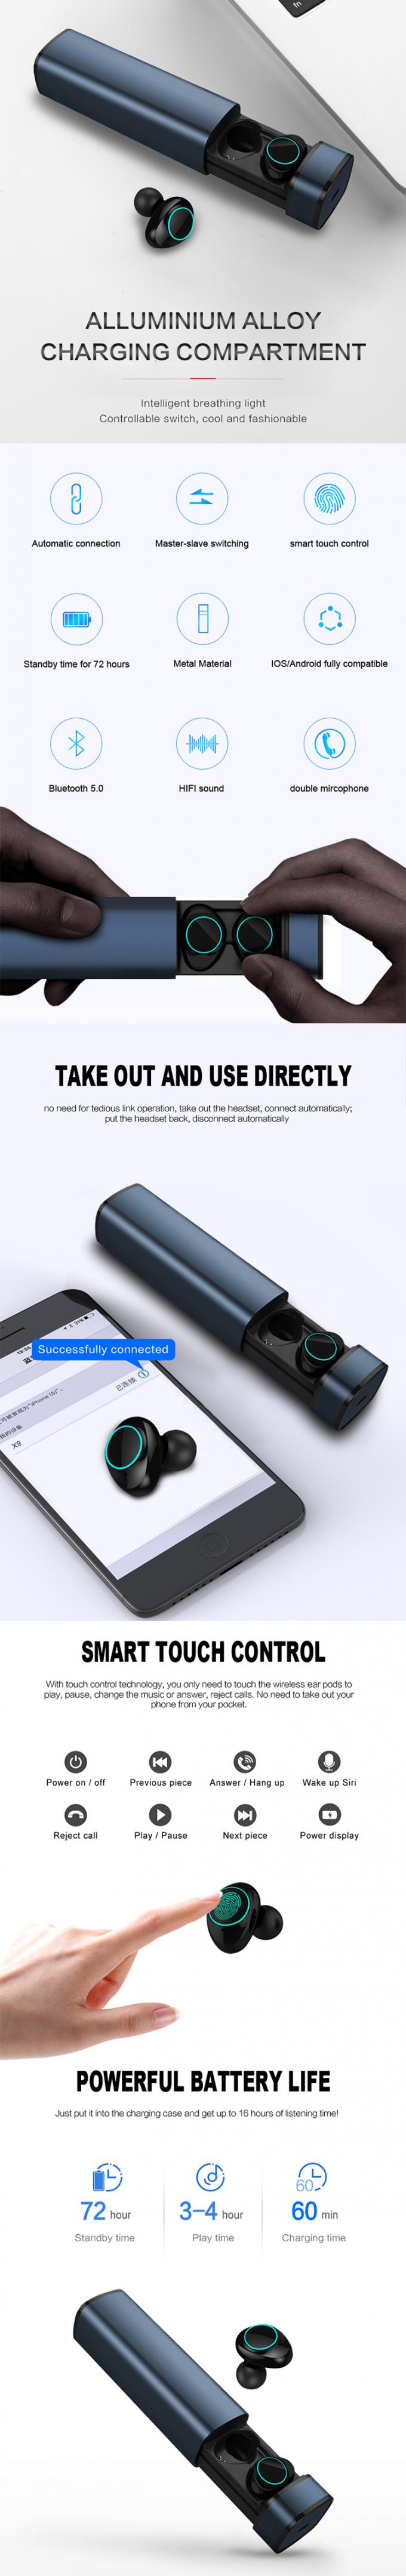 Ergonomic 500mAH Bluetooth Wireless Stereo Earbuds With Cylinder Charging Base 0